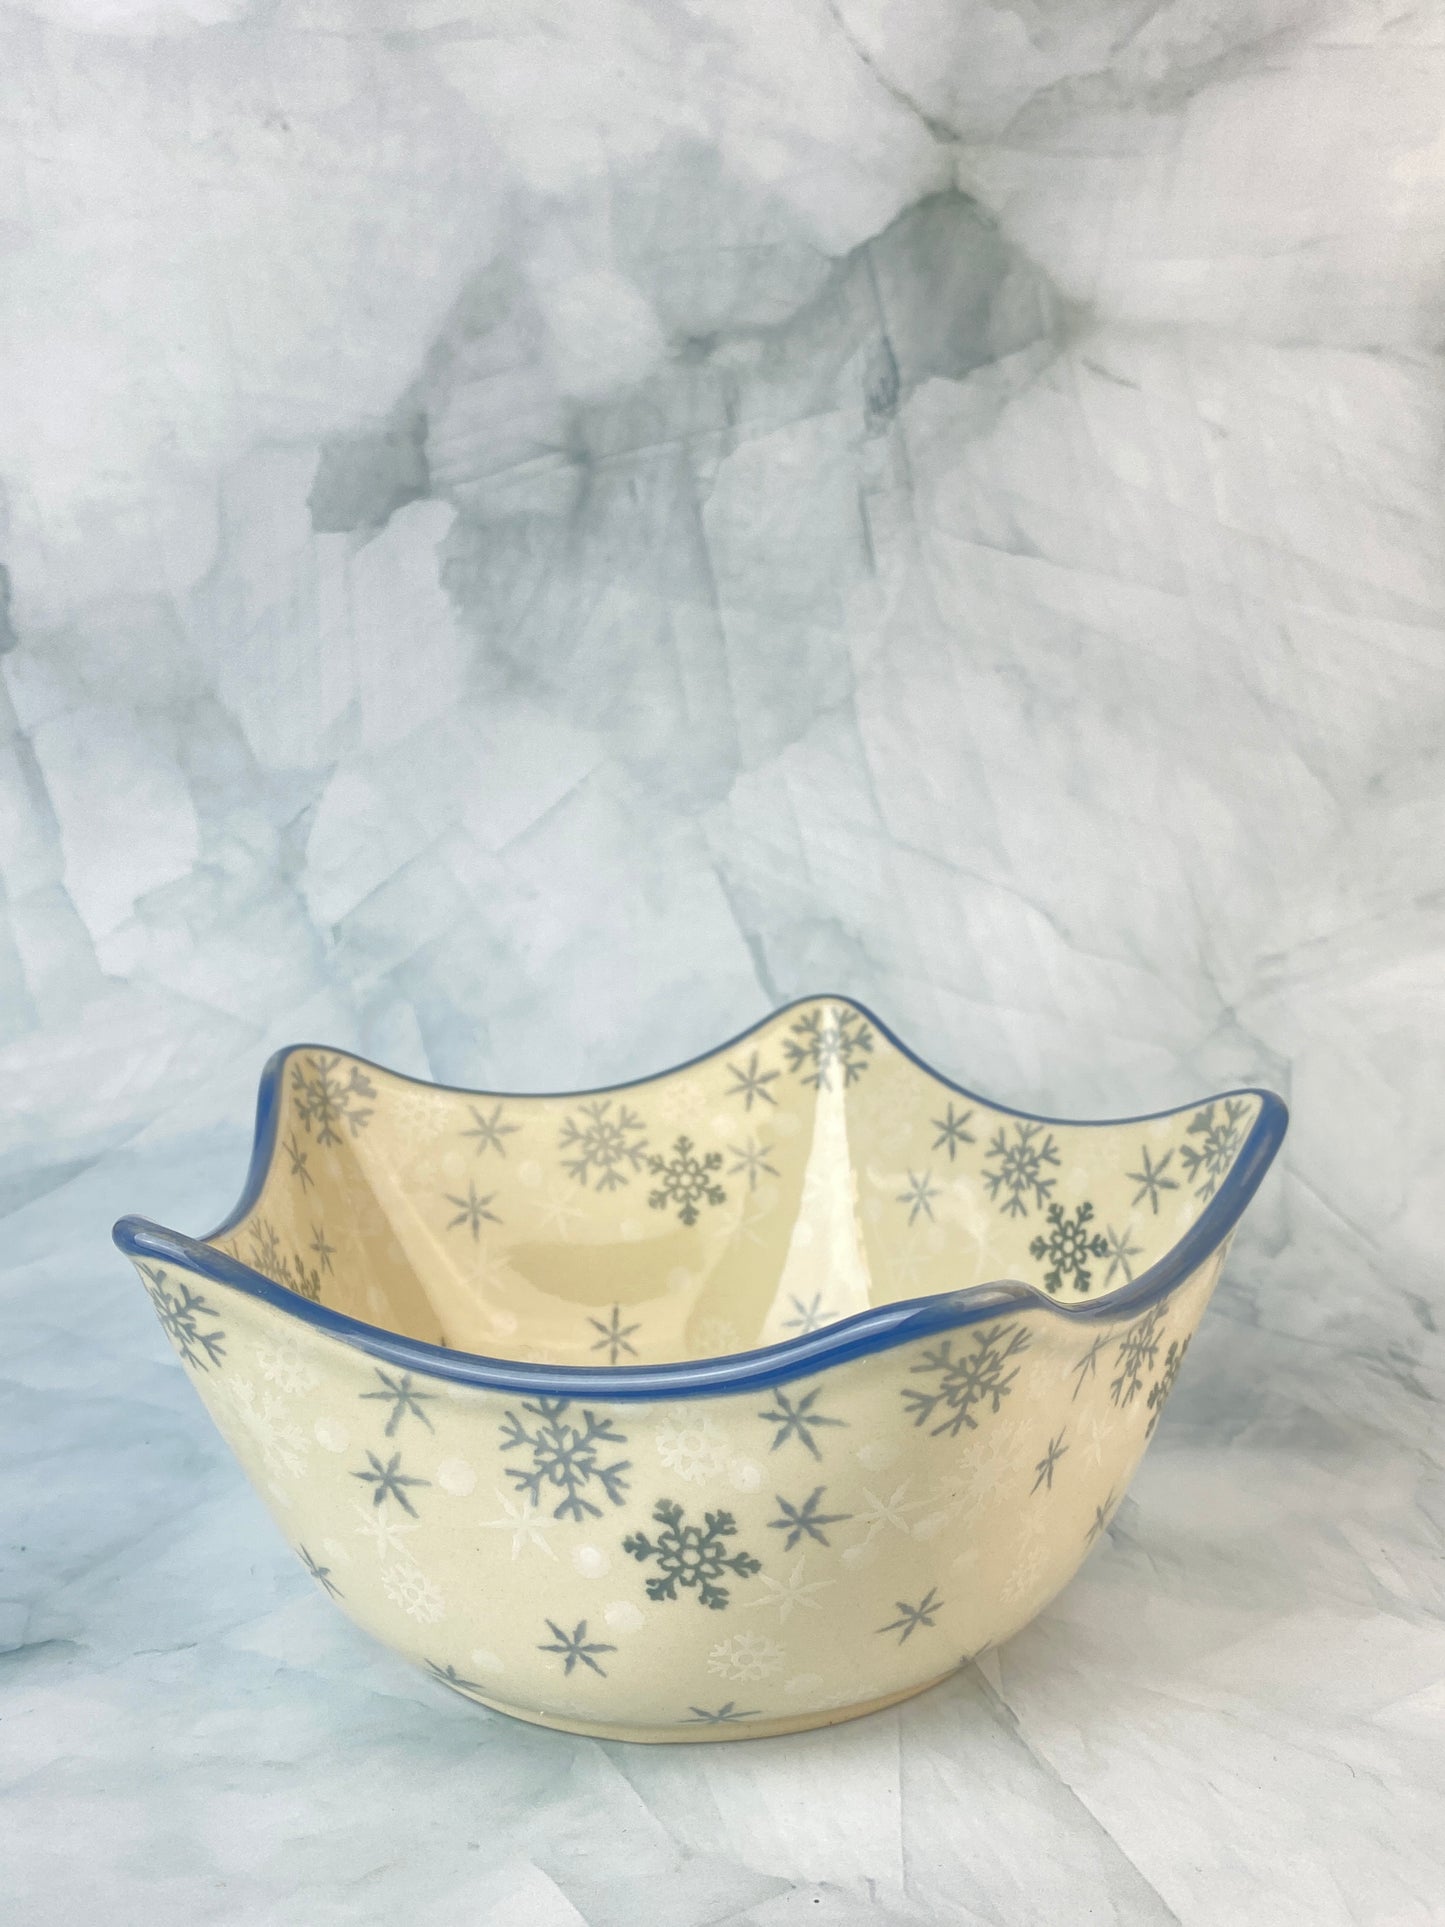 Five Pointed Bowl - Shape 814 - Pattern 2712